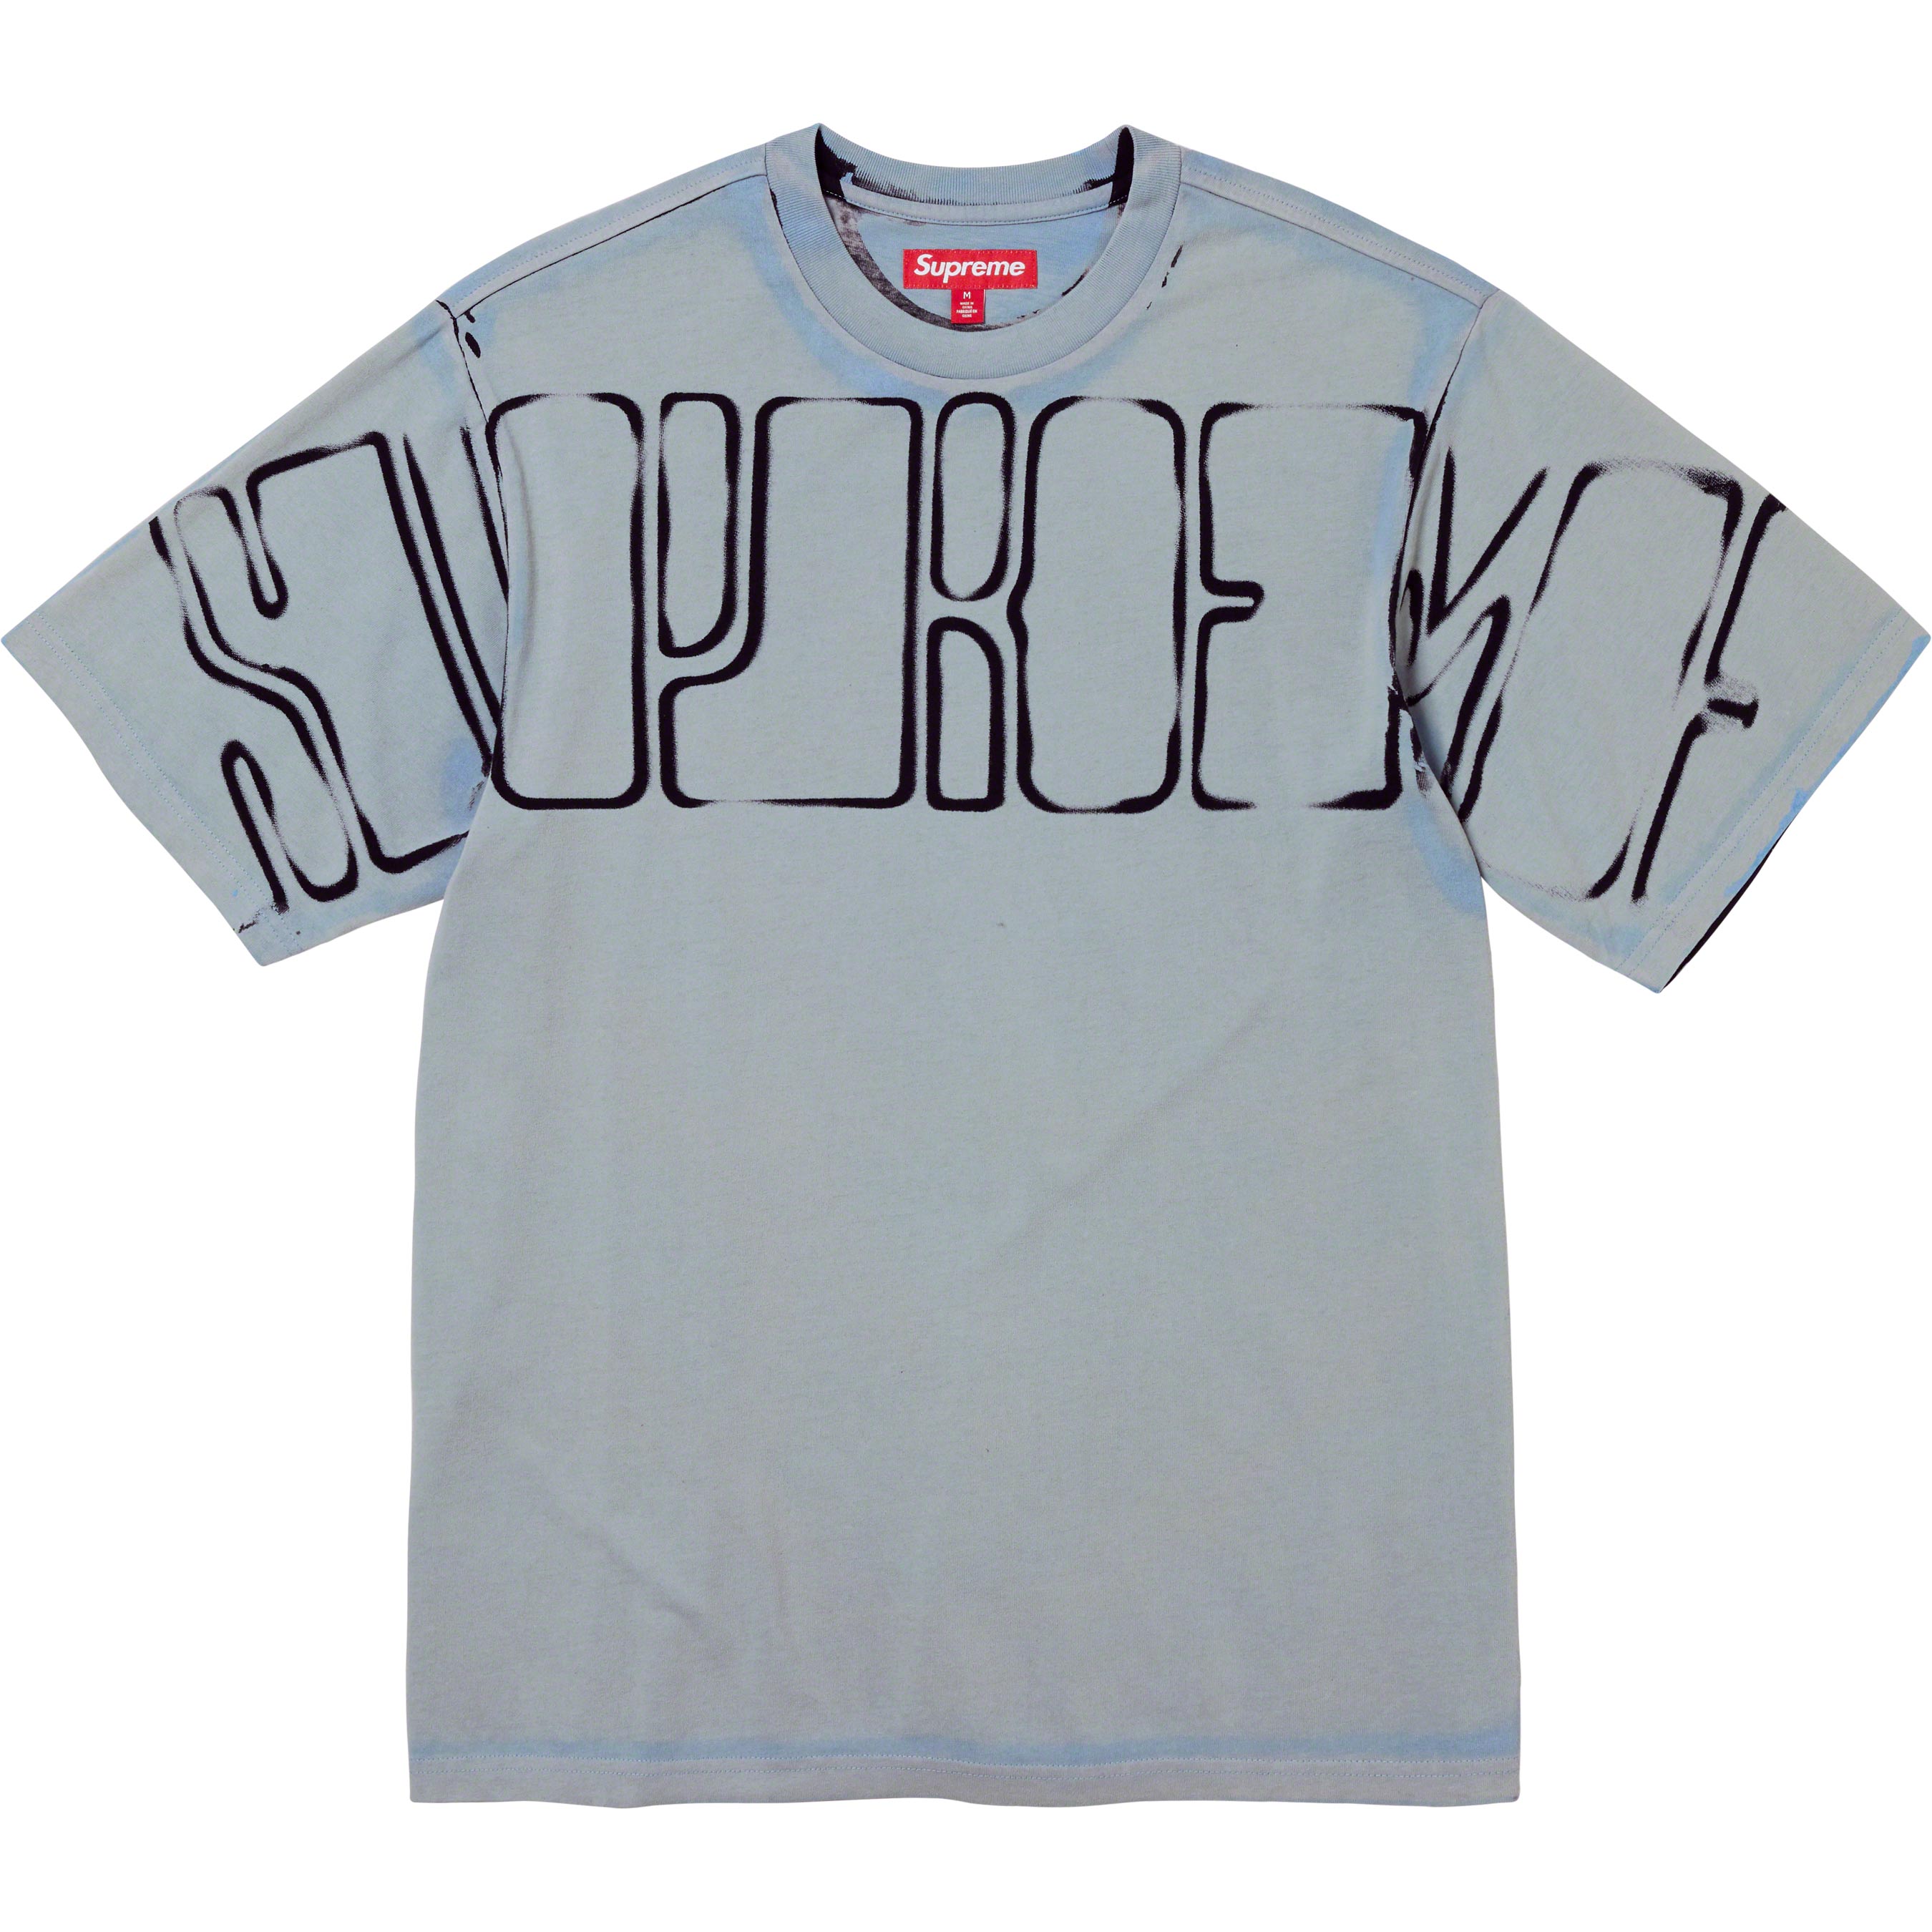 Supreme Overprint Knockout S/S Top Mカラーブラック